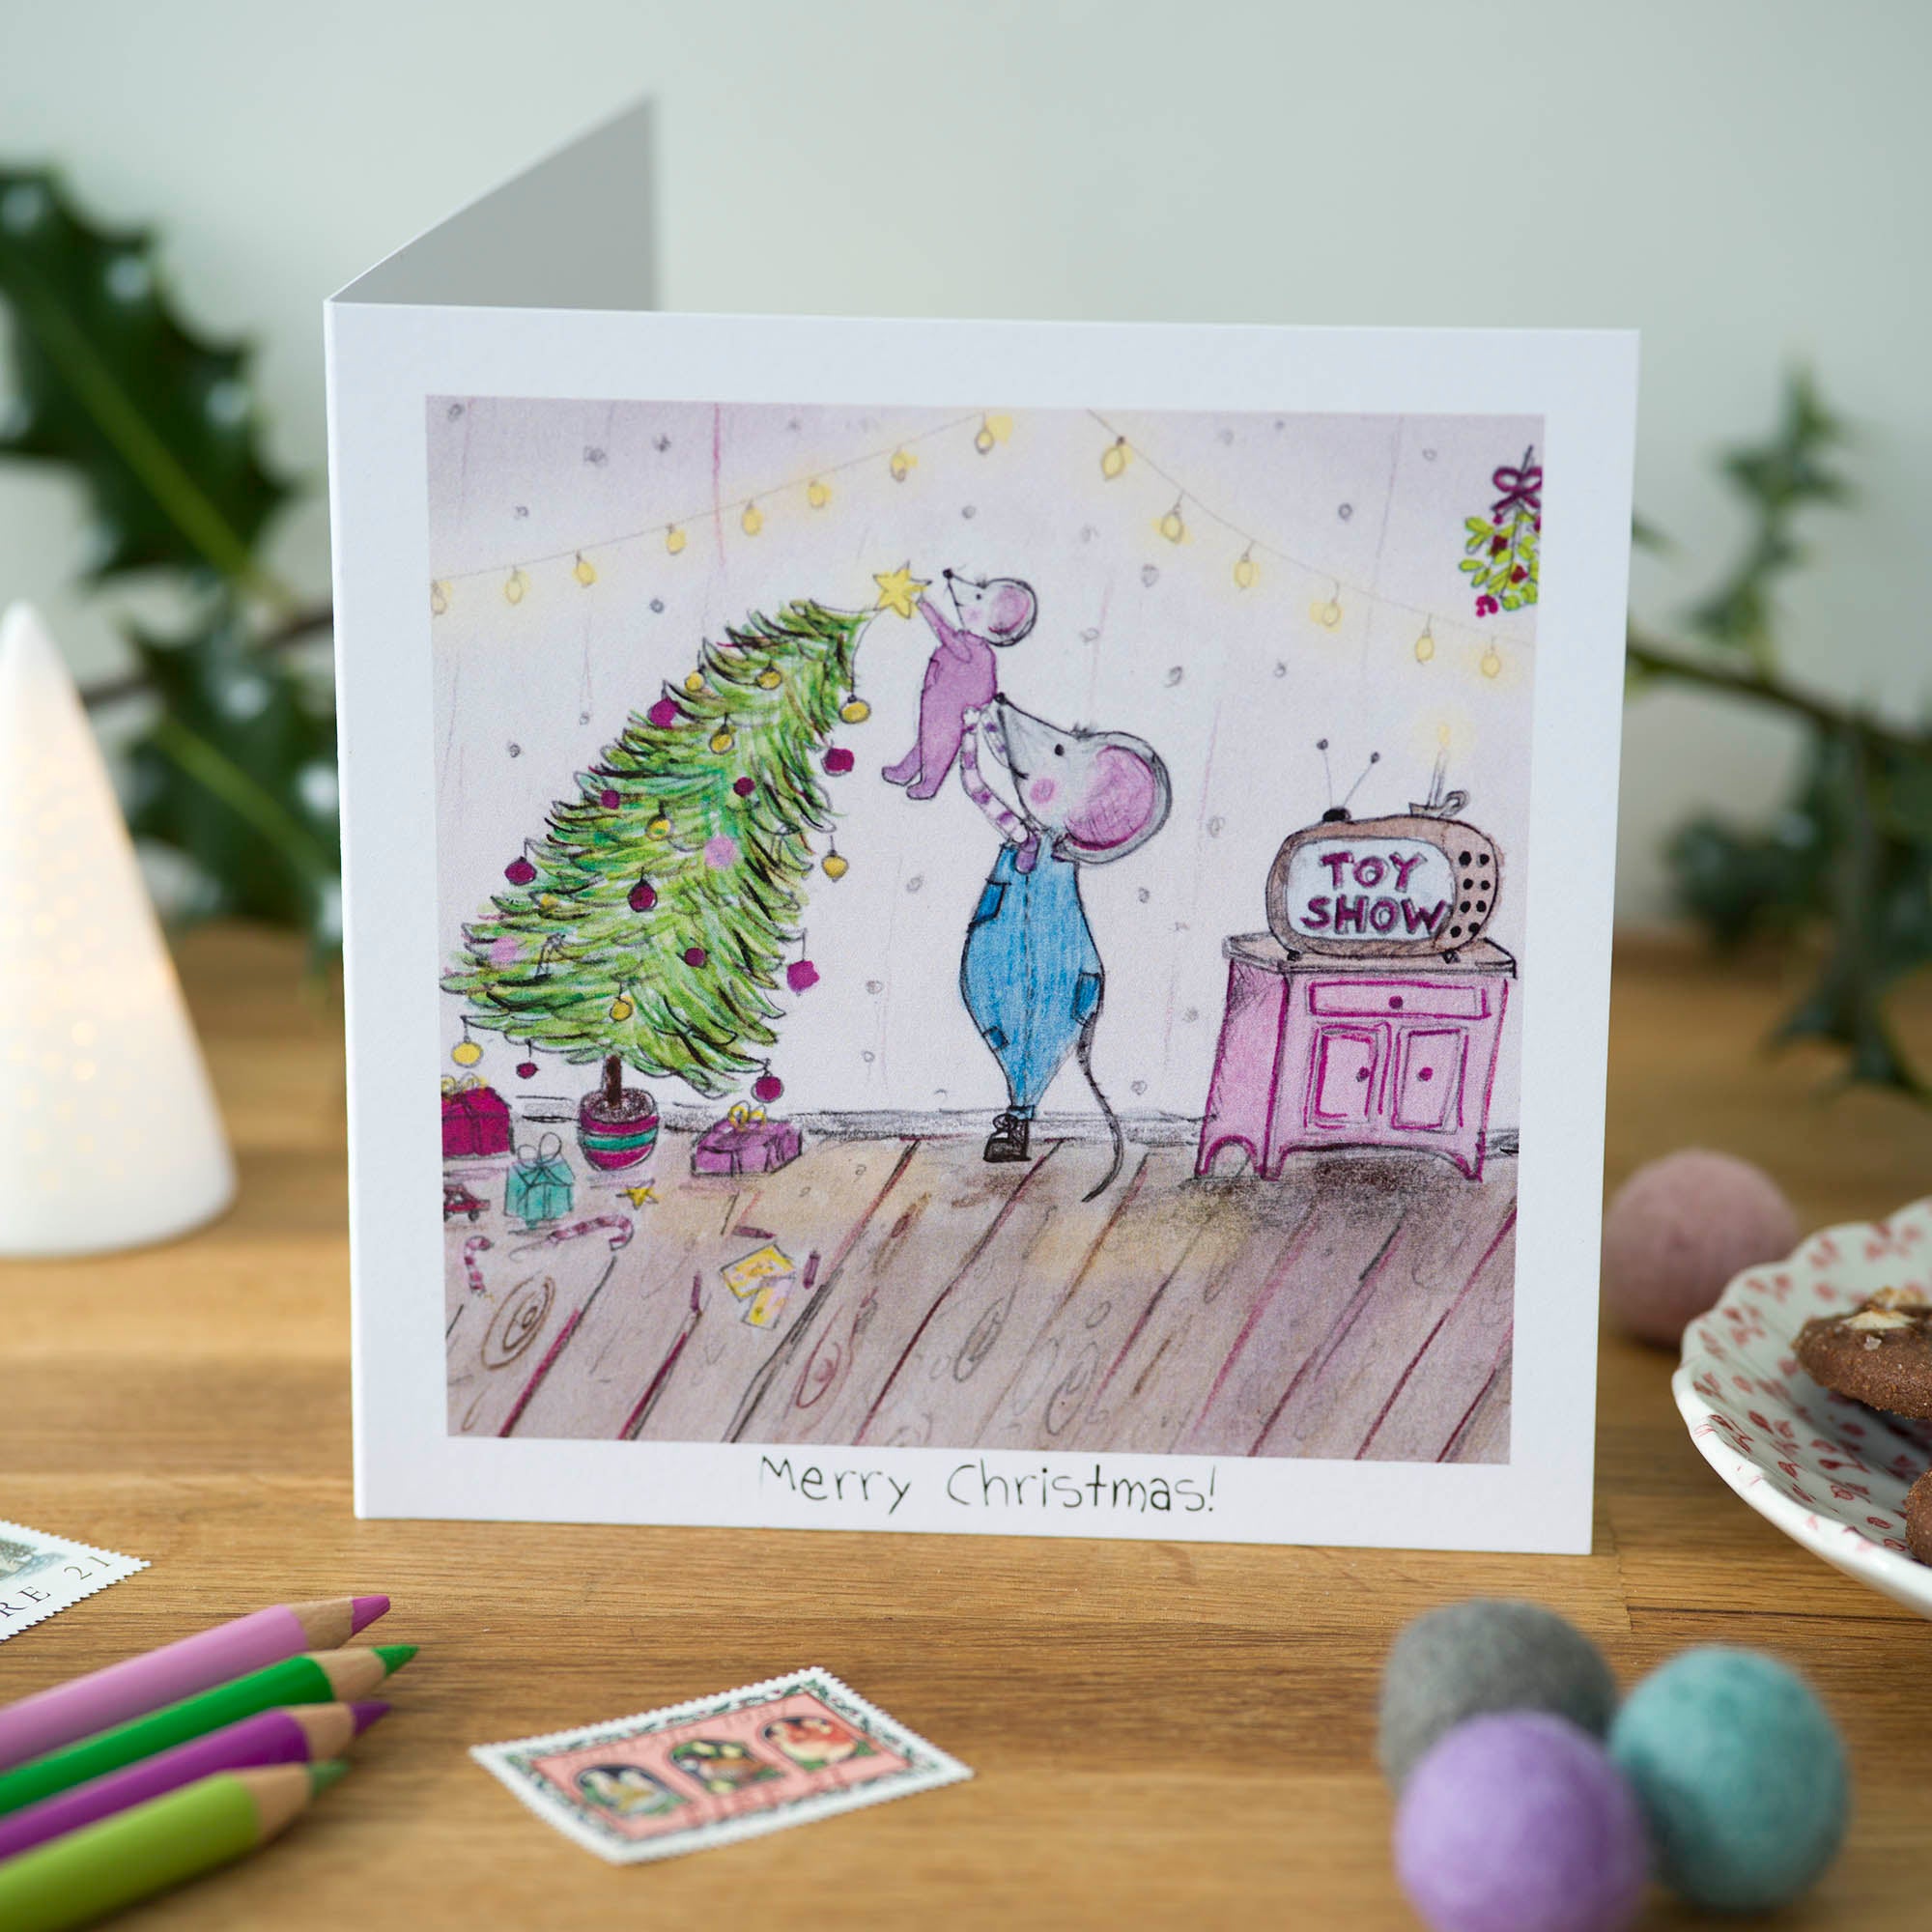 Pear Shaped Studio "Toy Show" Greeting Card